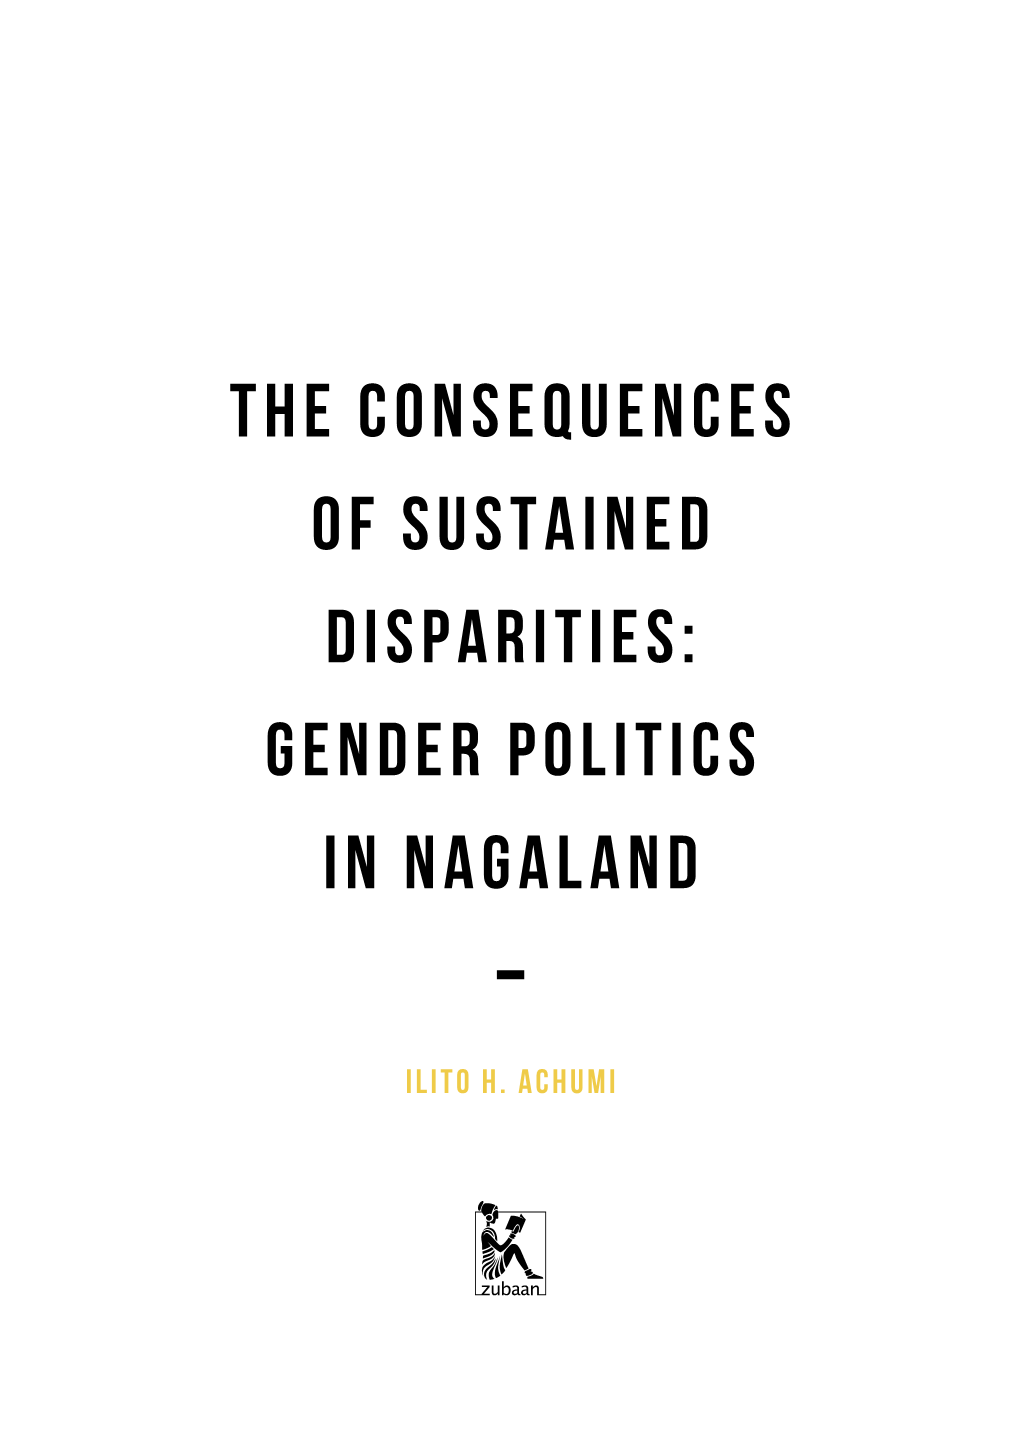 The Consequences of Sustained Disparities: Gender Politics in Nagaland